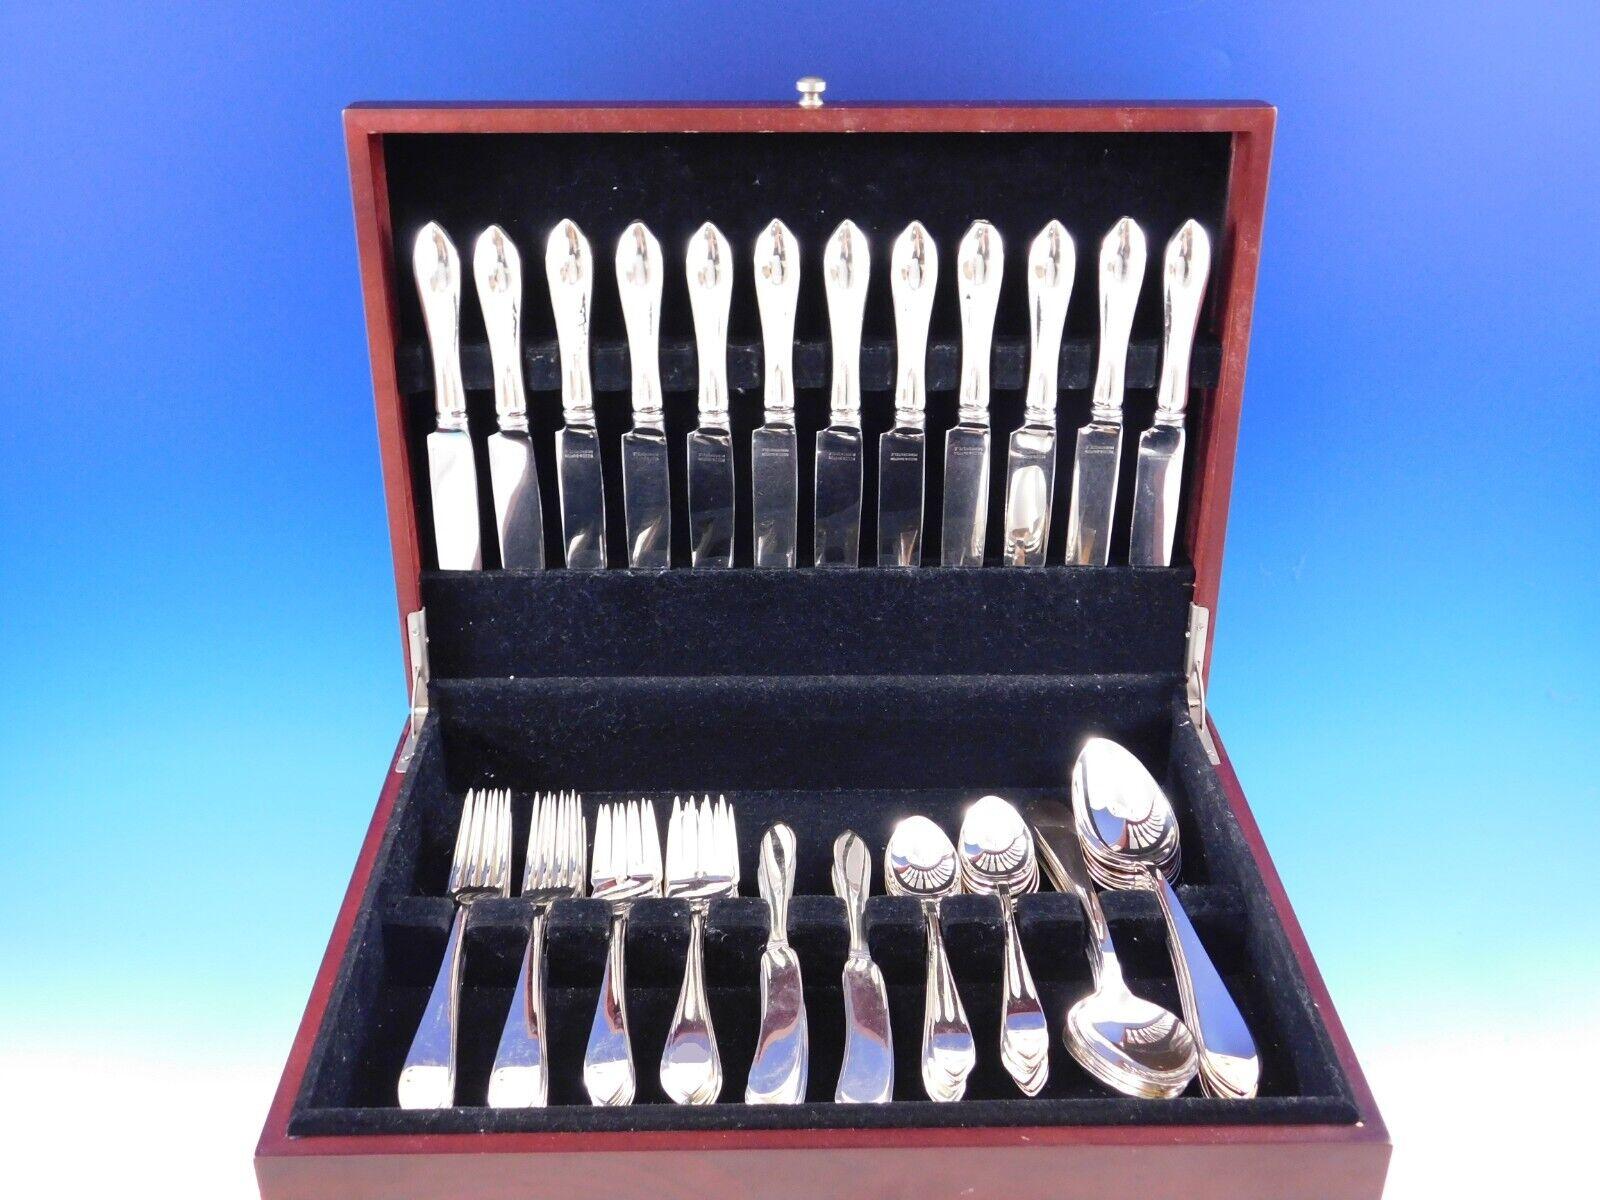 Pointed Antique by Dominick and Haff sterling silver Flatware set, 72 pieces. This set includes:

12 Knives, 8 7/8